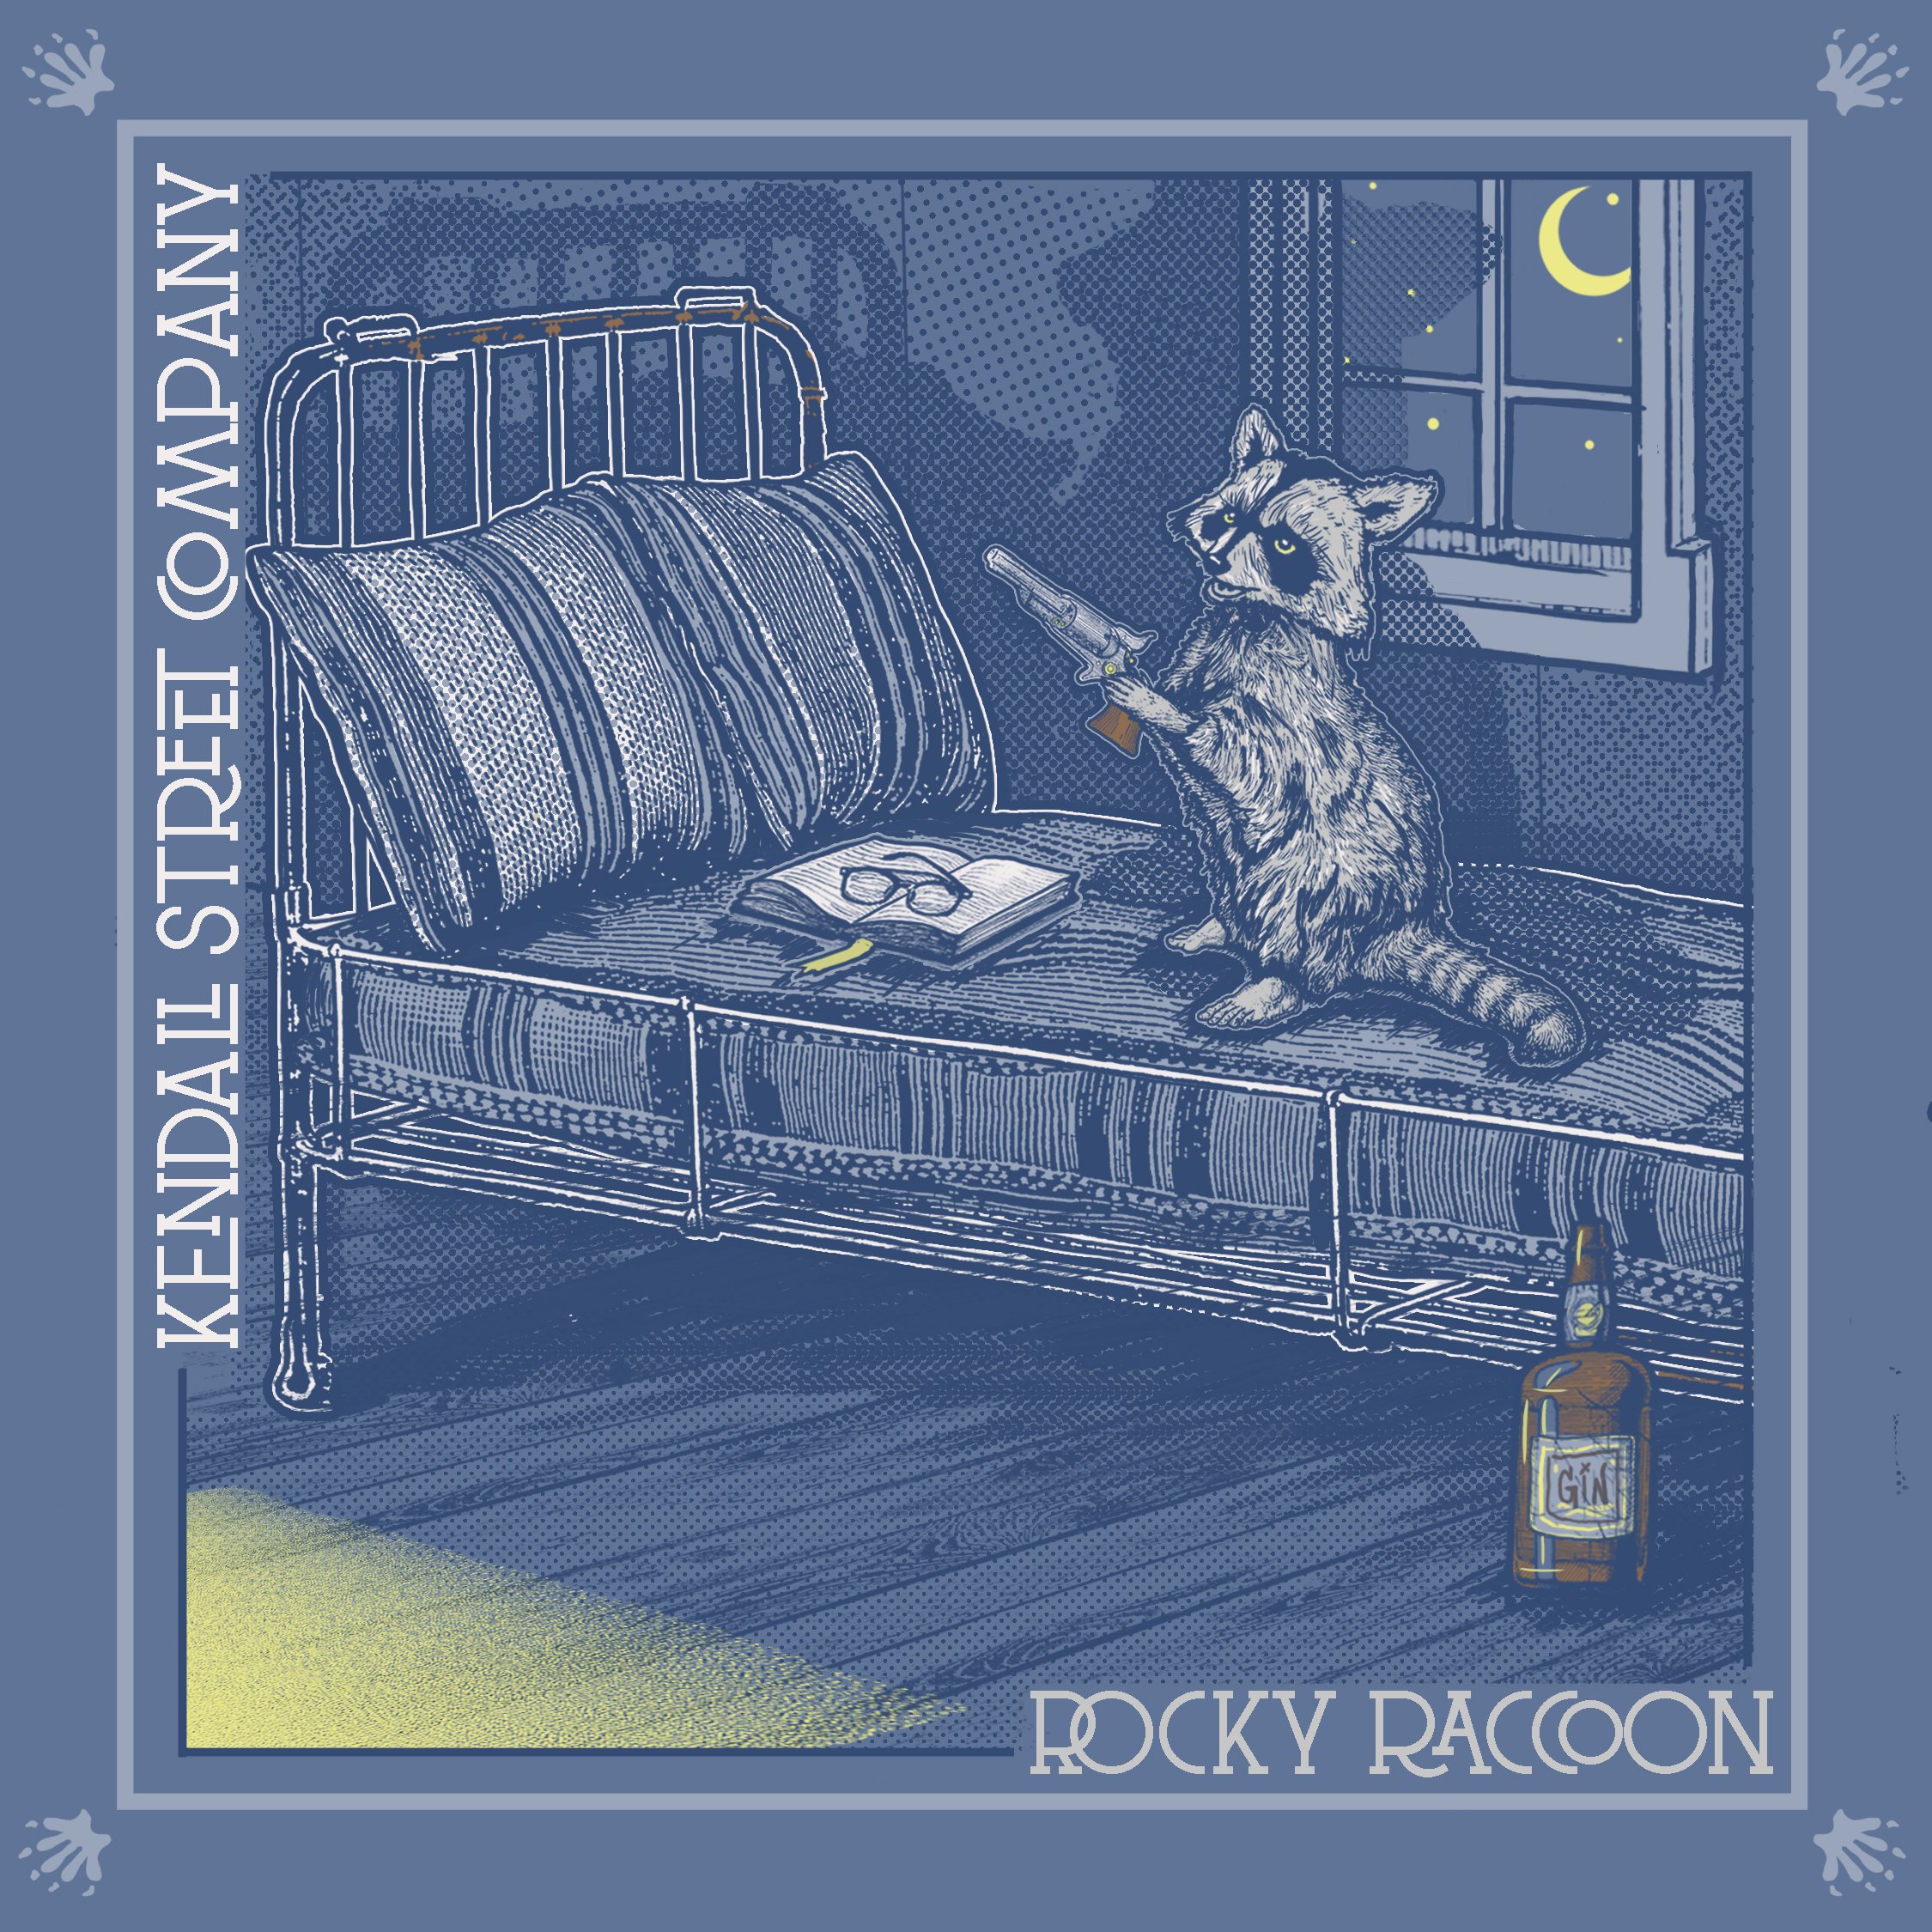 KENDALL STREET COMPANY RELEASES “ROCKY RACCOON” COVER